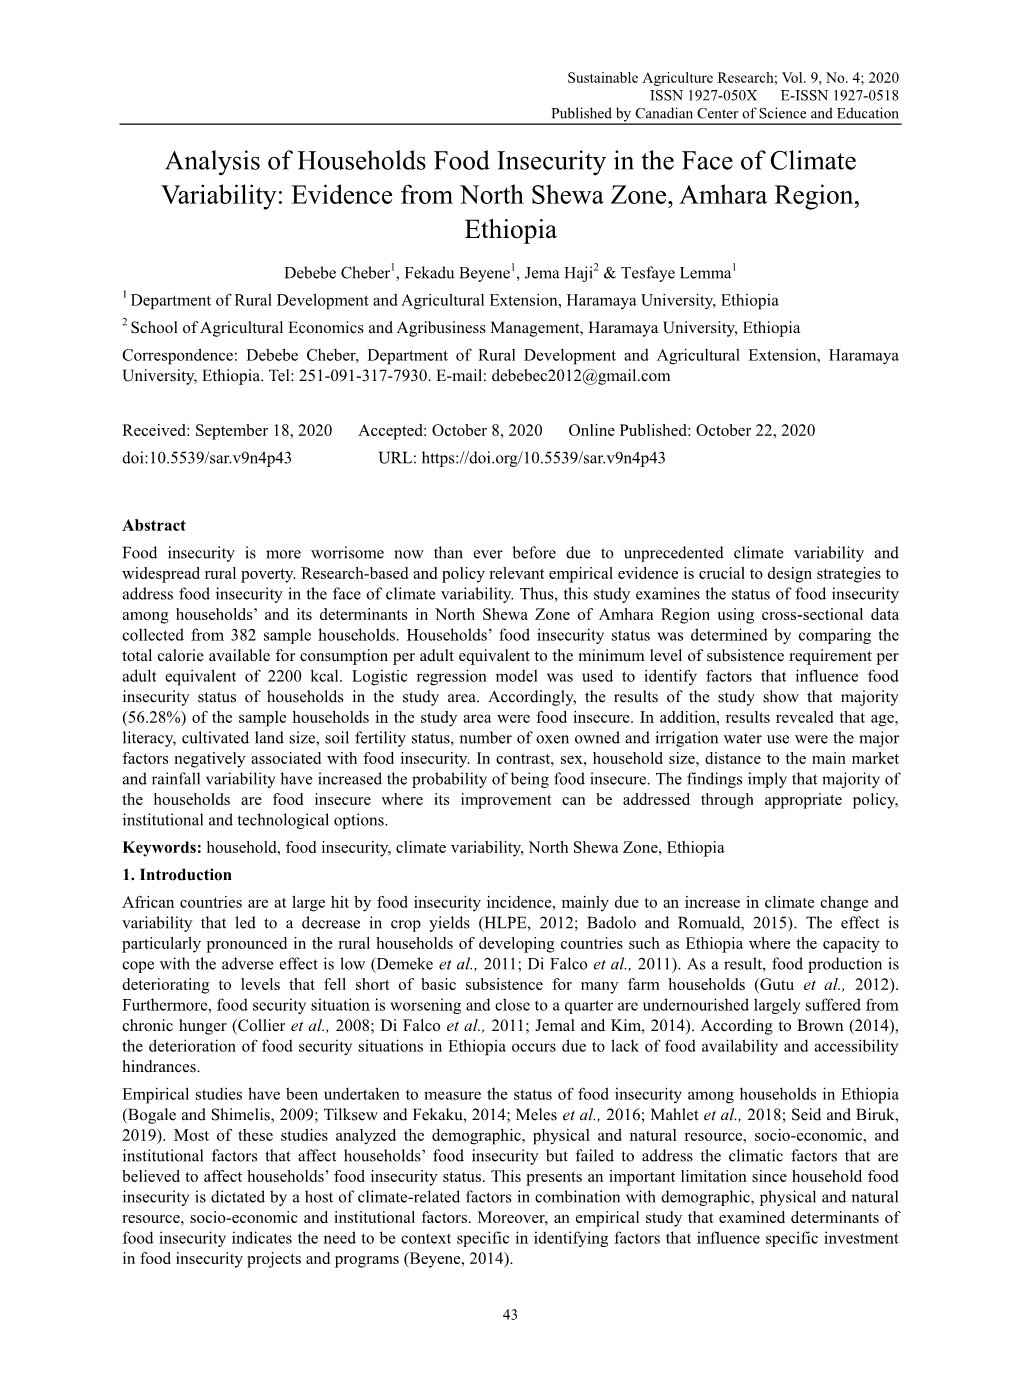 Analysis of Households Food Insecurity in the Face of Climate Variability: Evidence from North Shewa Zone, Amhara Region, Ethiopia